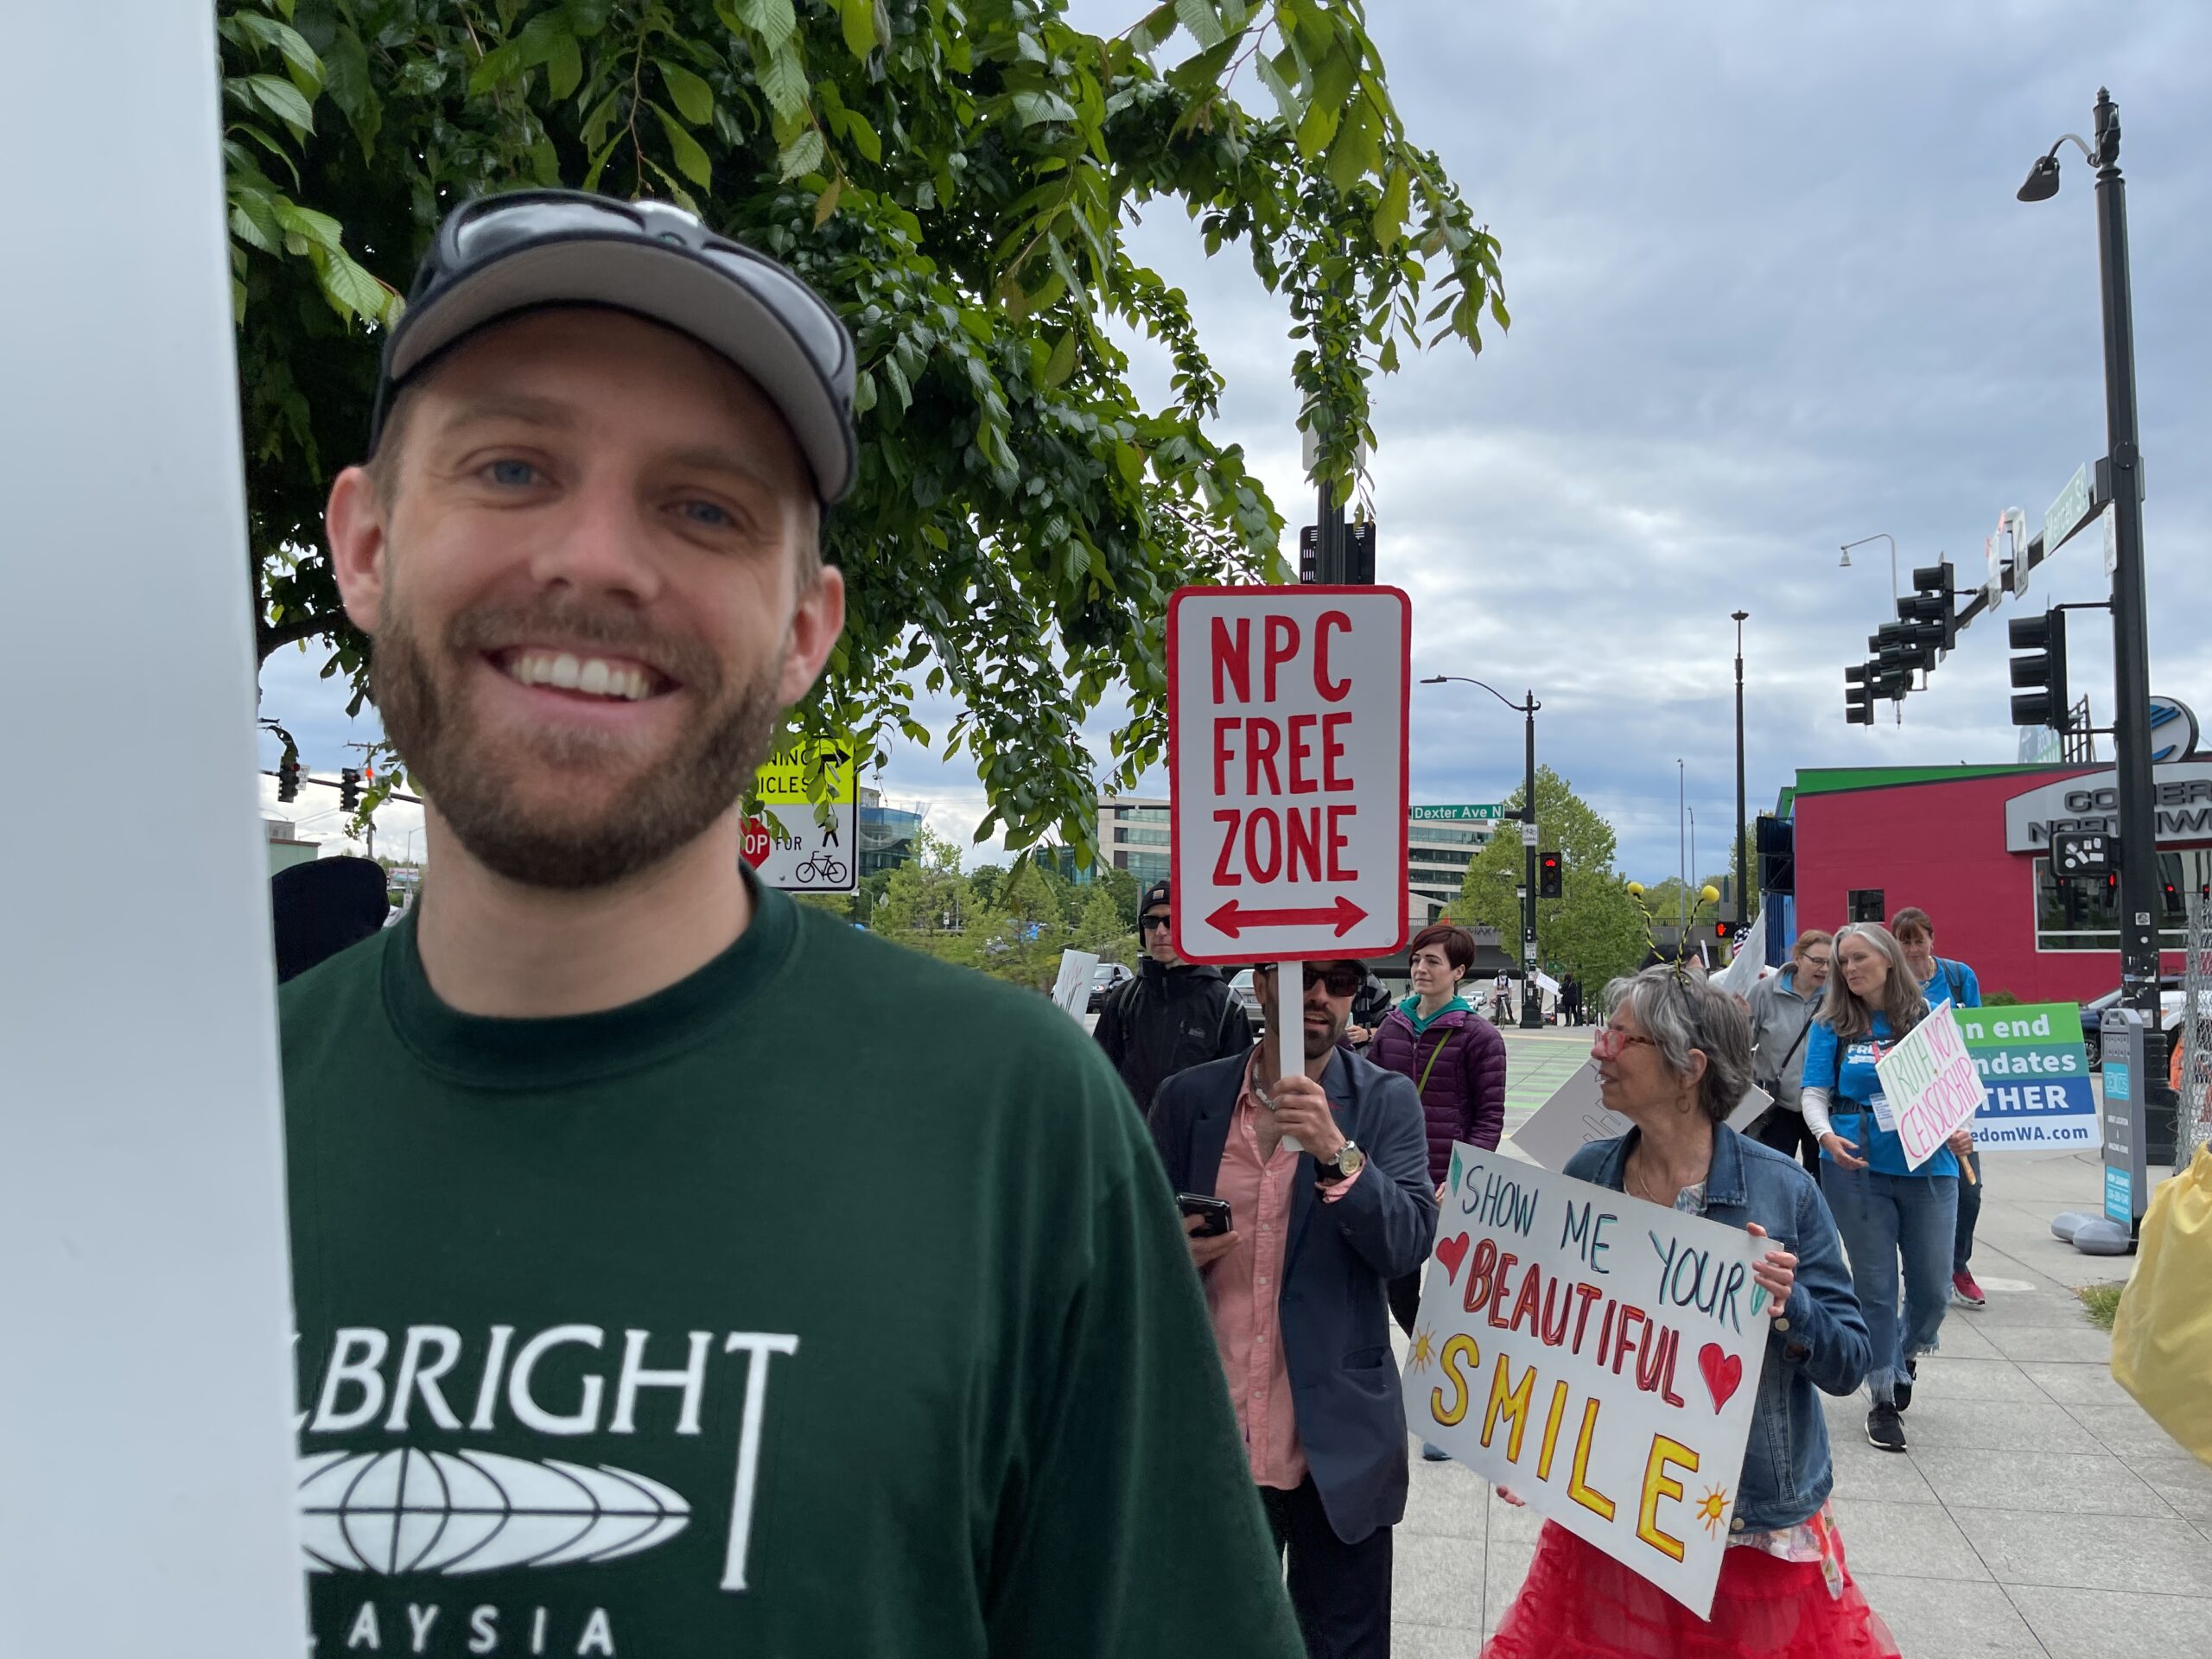 Seattle Protests & The Big Boycott Coming In July 2021